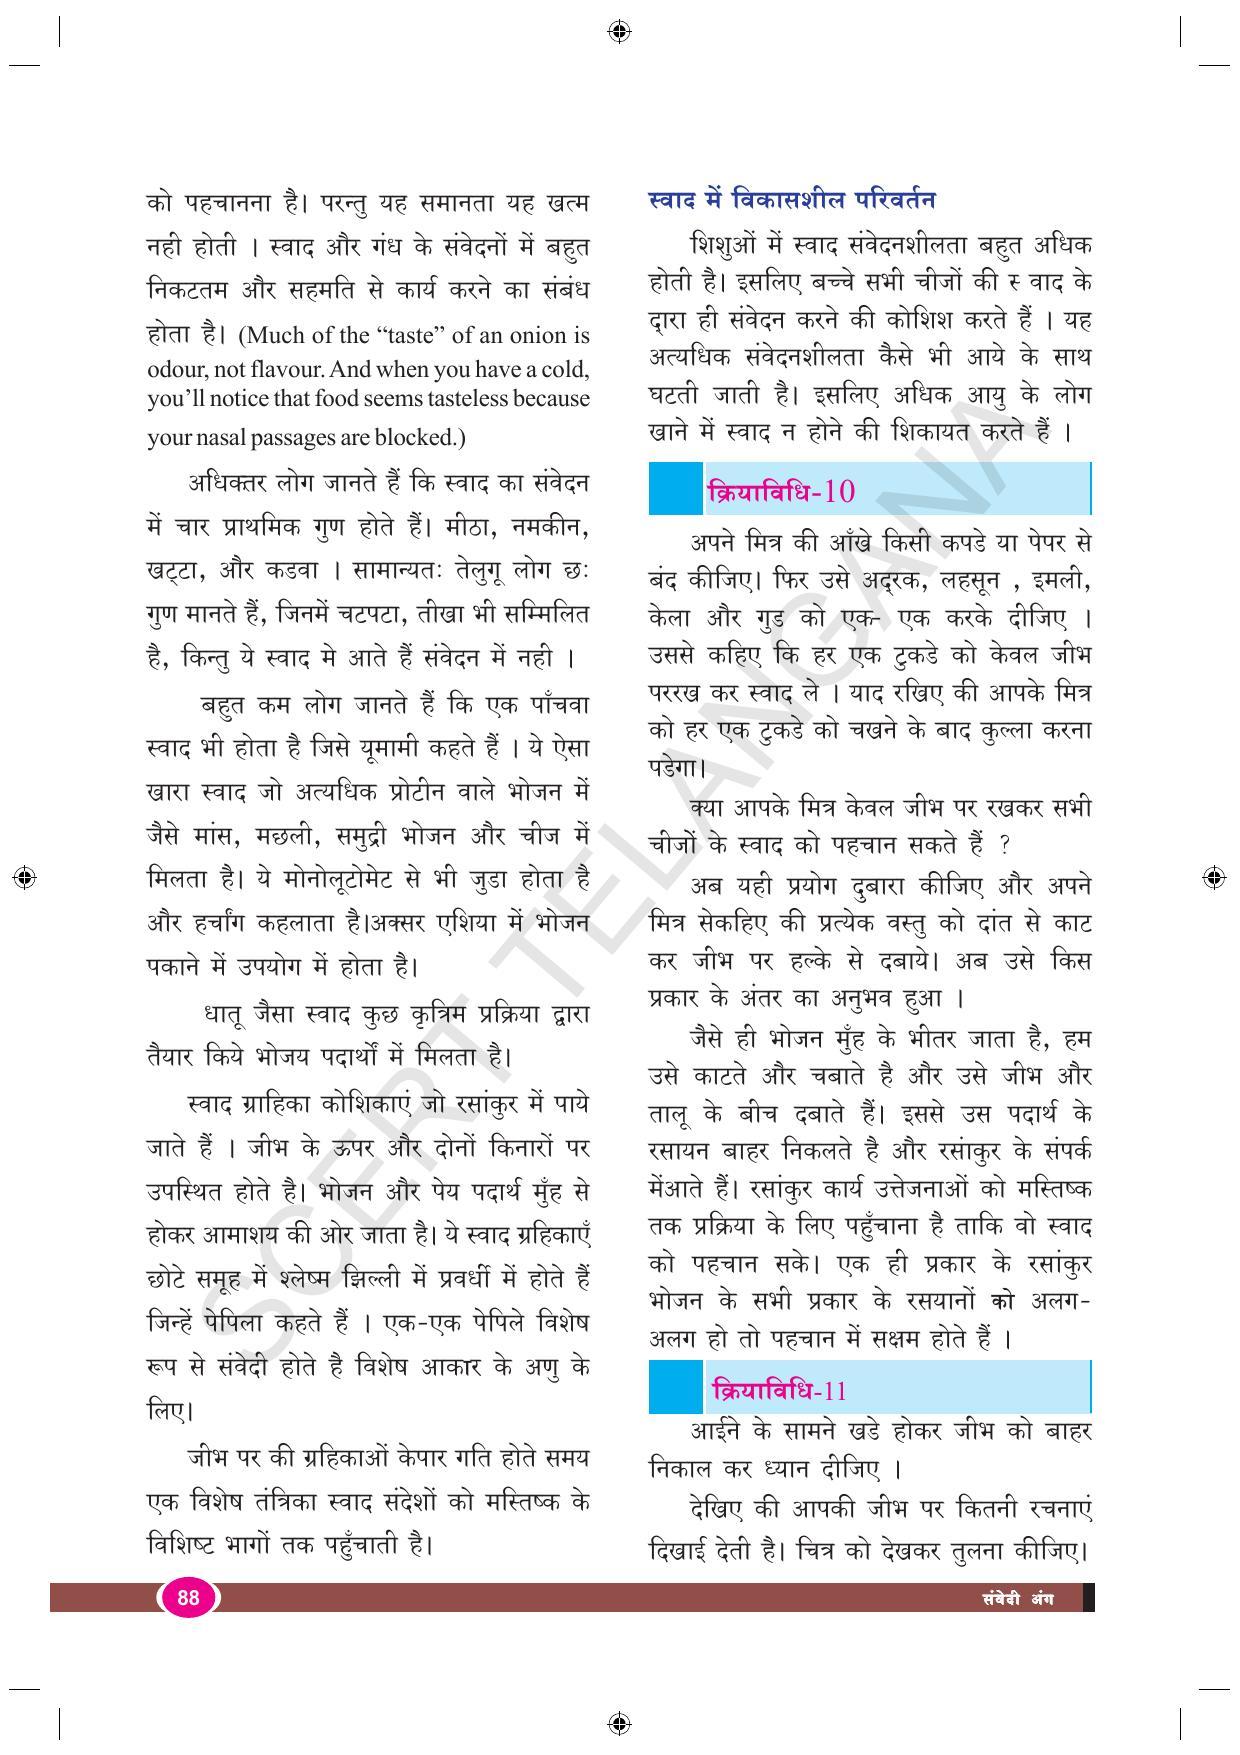 TS SCERT Class 9 Biological Science (Hindi Medium) Text Book - Page 100